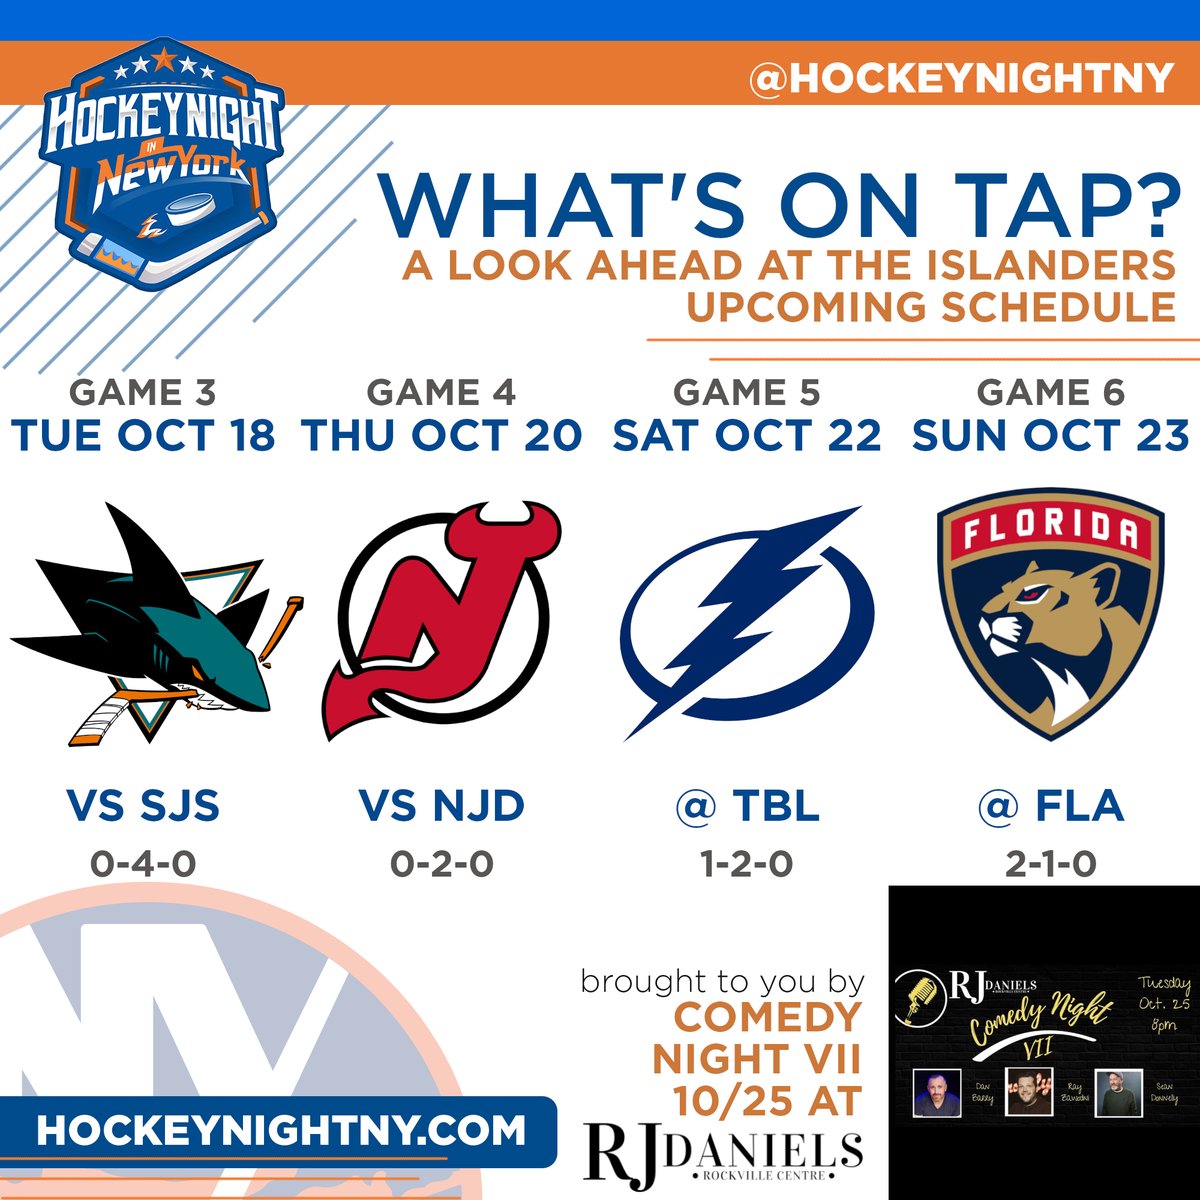 The schedule is starting to pick up as the #isles close out their 4-game opening homestand w/visits from the Sharks & Devils before taking a trip down to Florida for a set of back-to-backs vs the Lightning & Panthers! That's What's On Tap brought to you by 
@RJDanielsRVC! #NHL https://t.co/wagHKGo84P